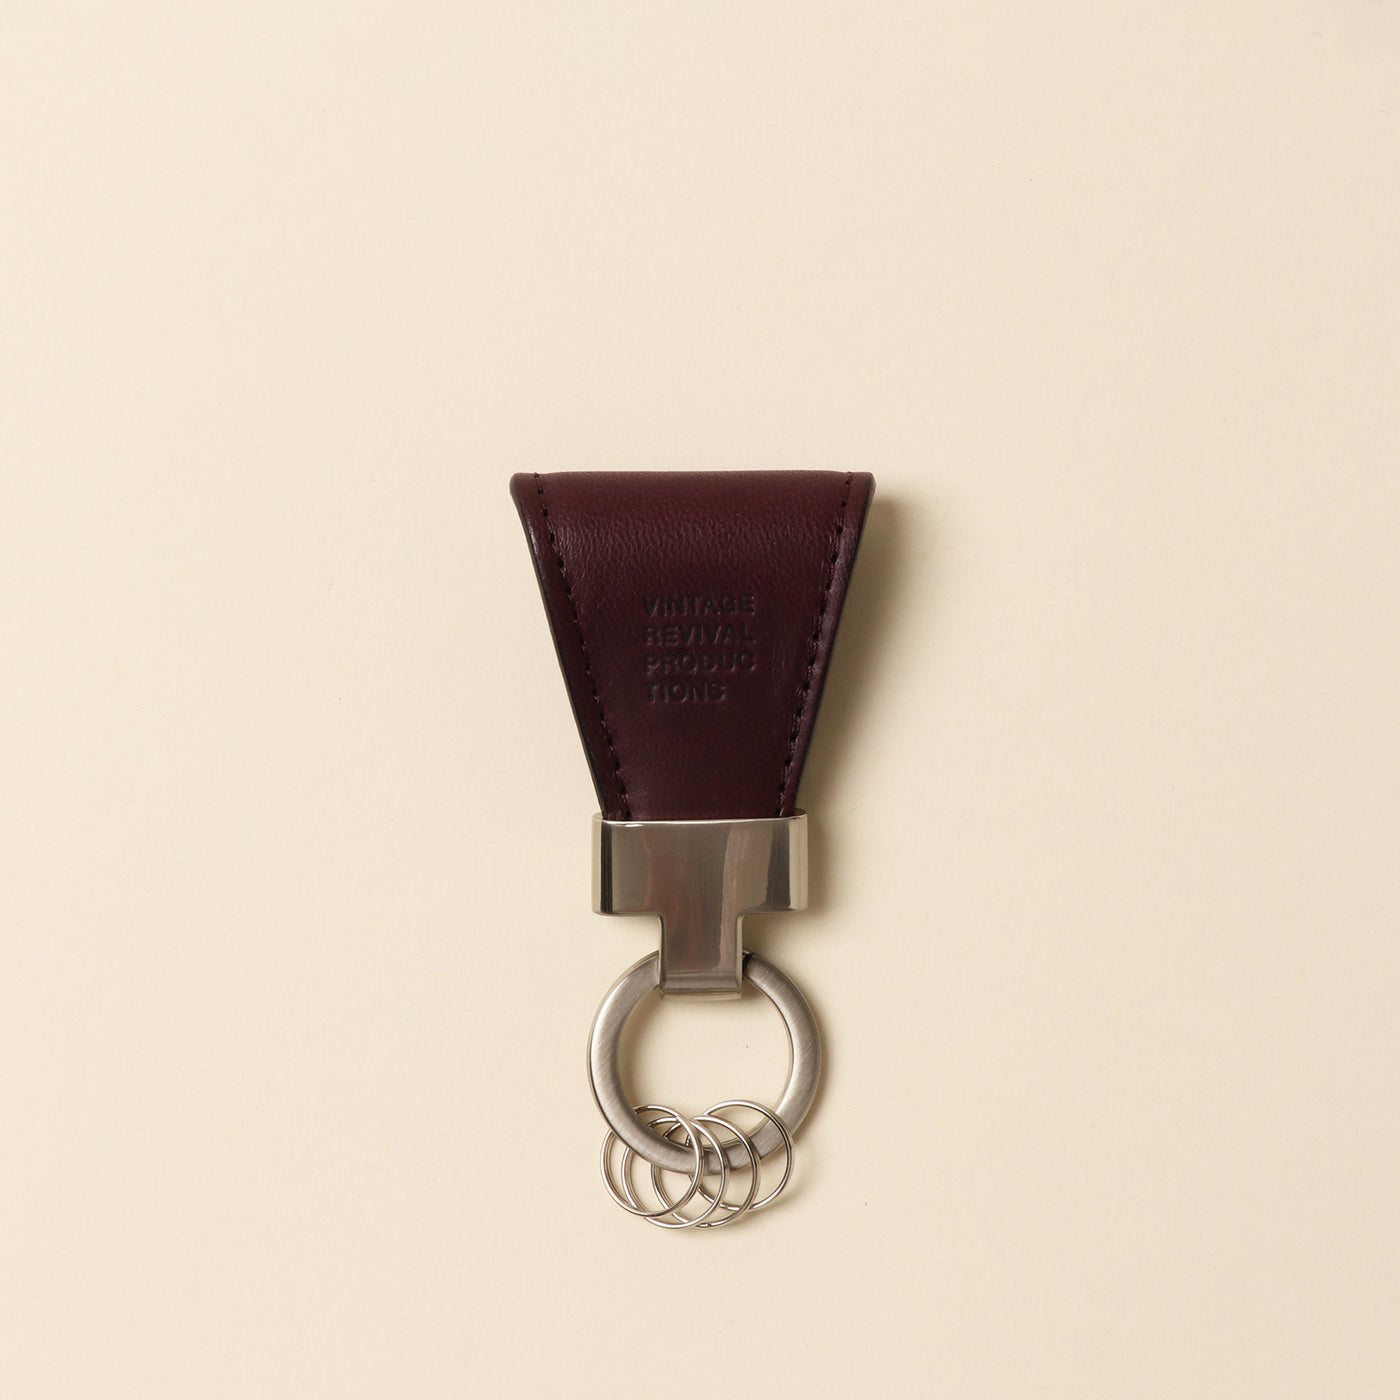 ＜Vintage Revival Productions key clip oiled leather, wine